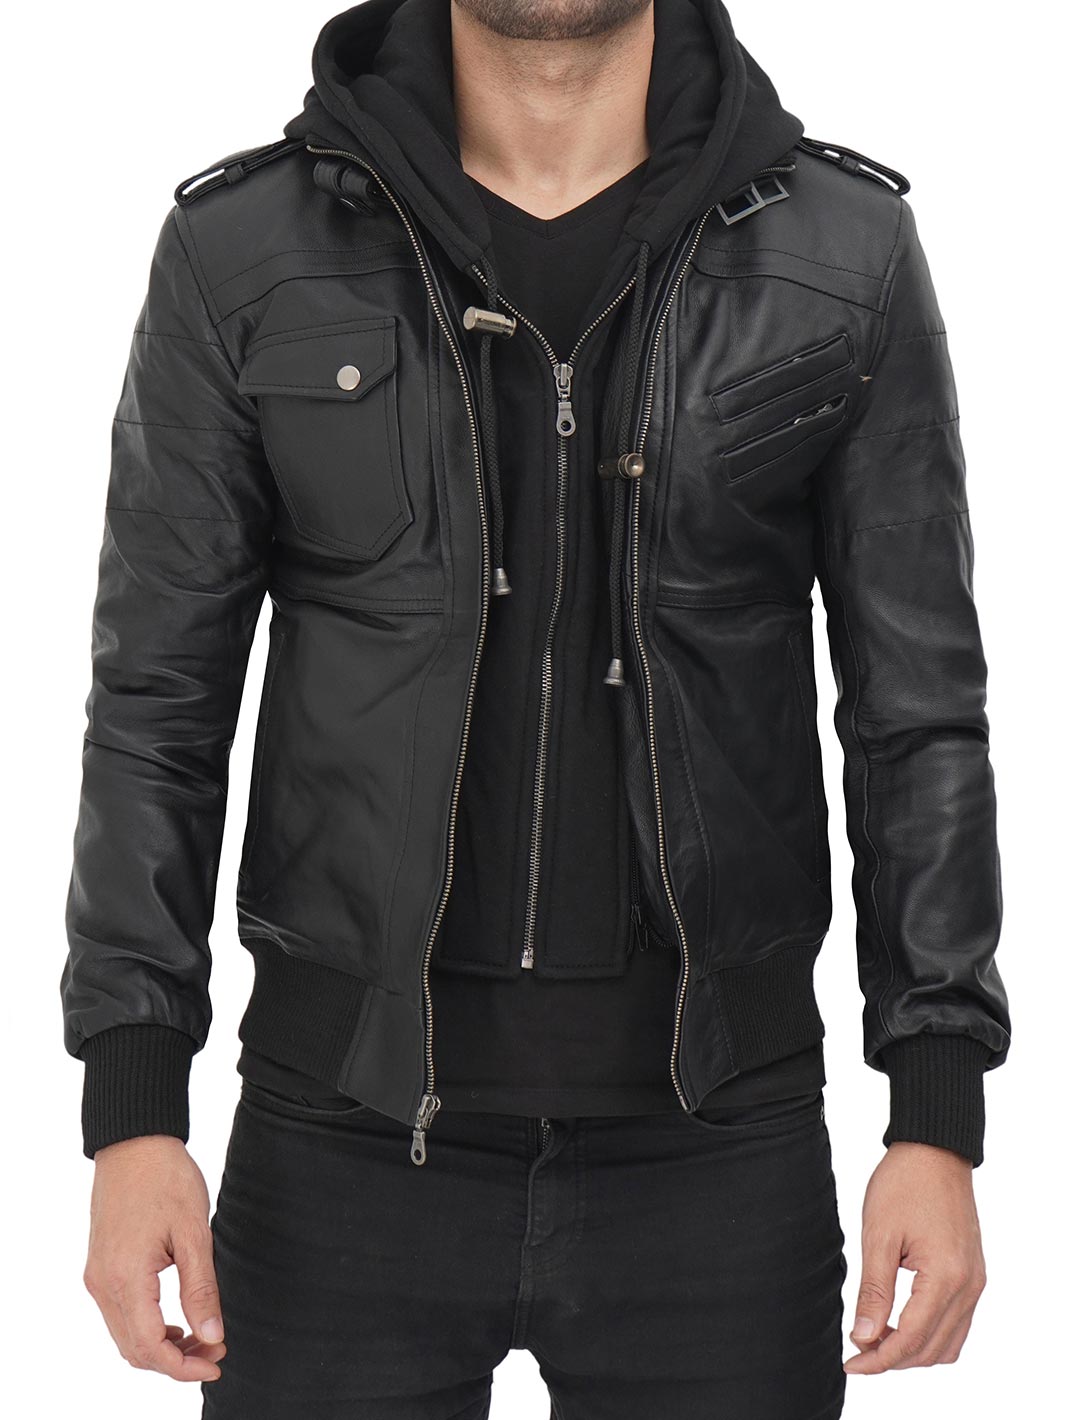 black leather jacket with hood mens